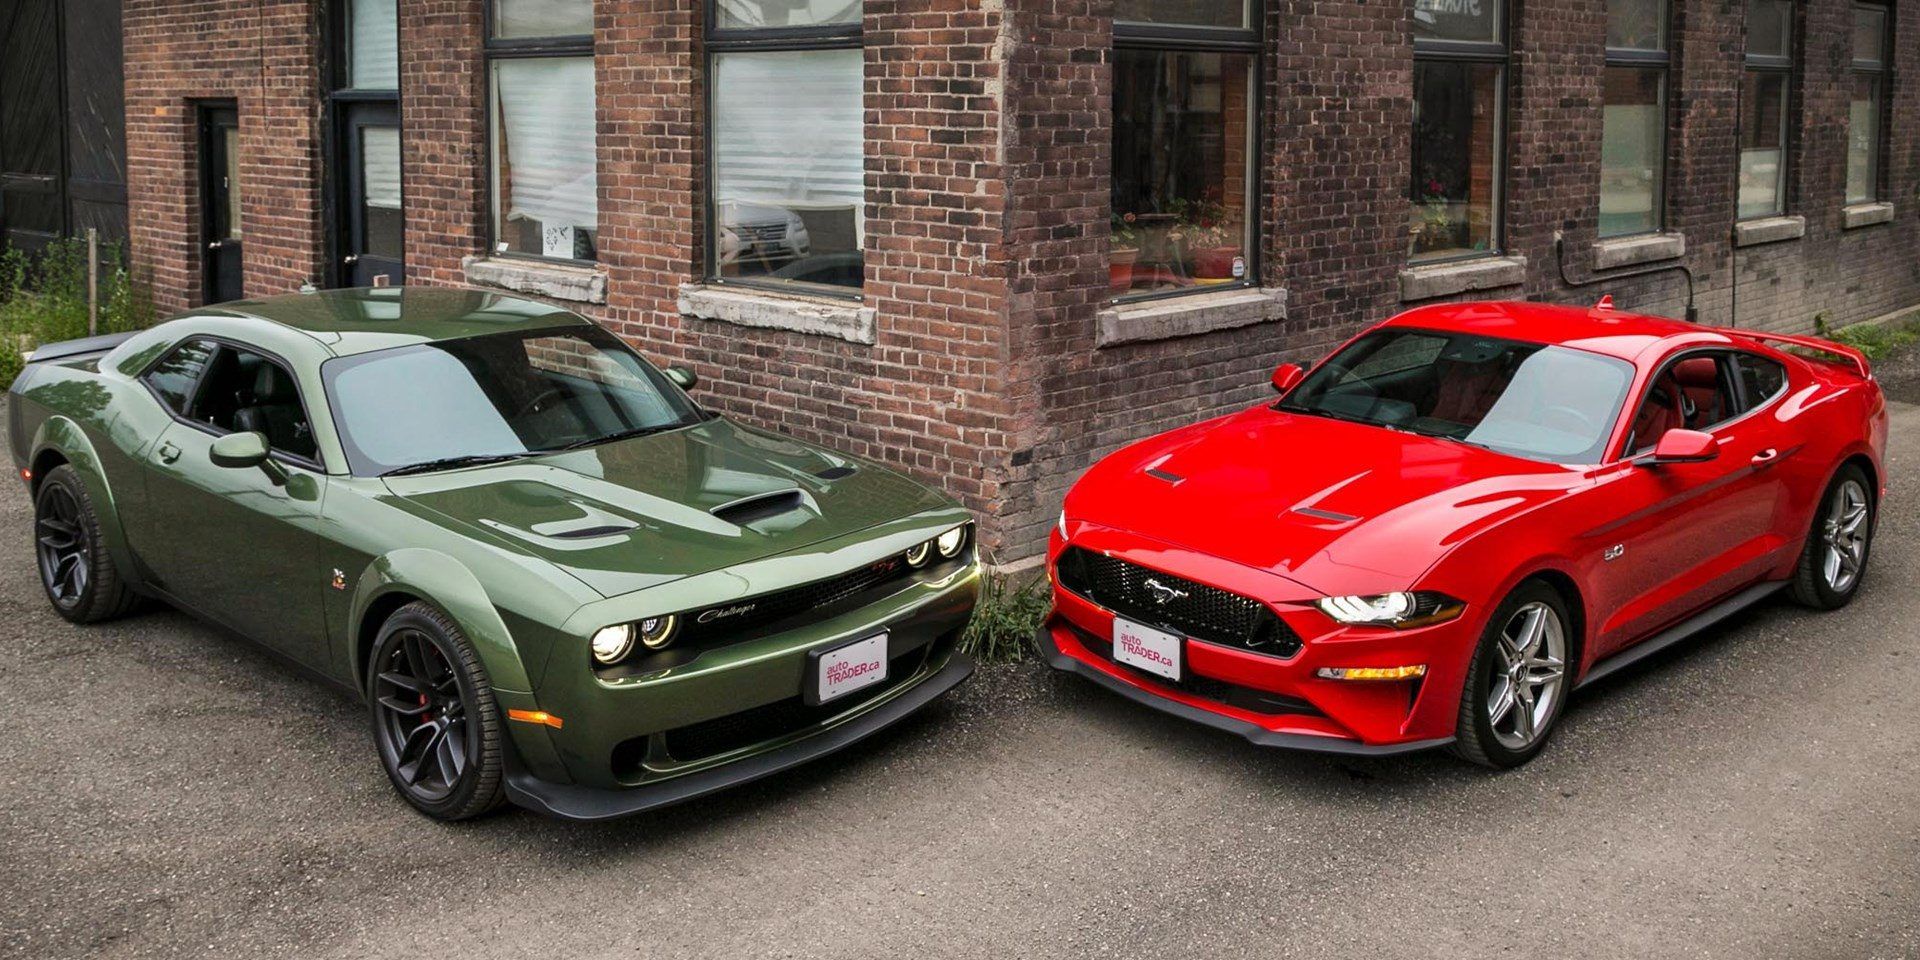 Mustang Vs Challenger 10 Things To Consider Before Buying 